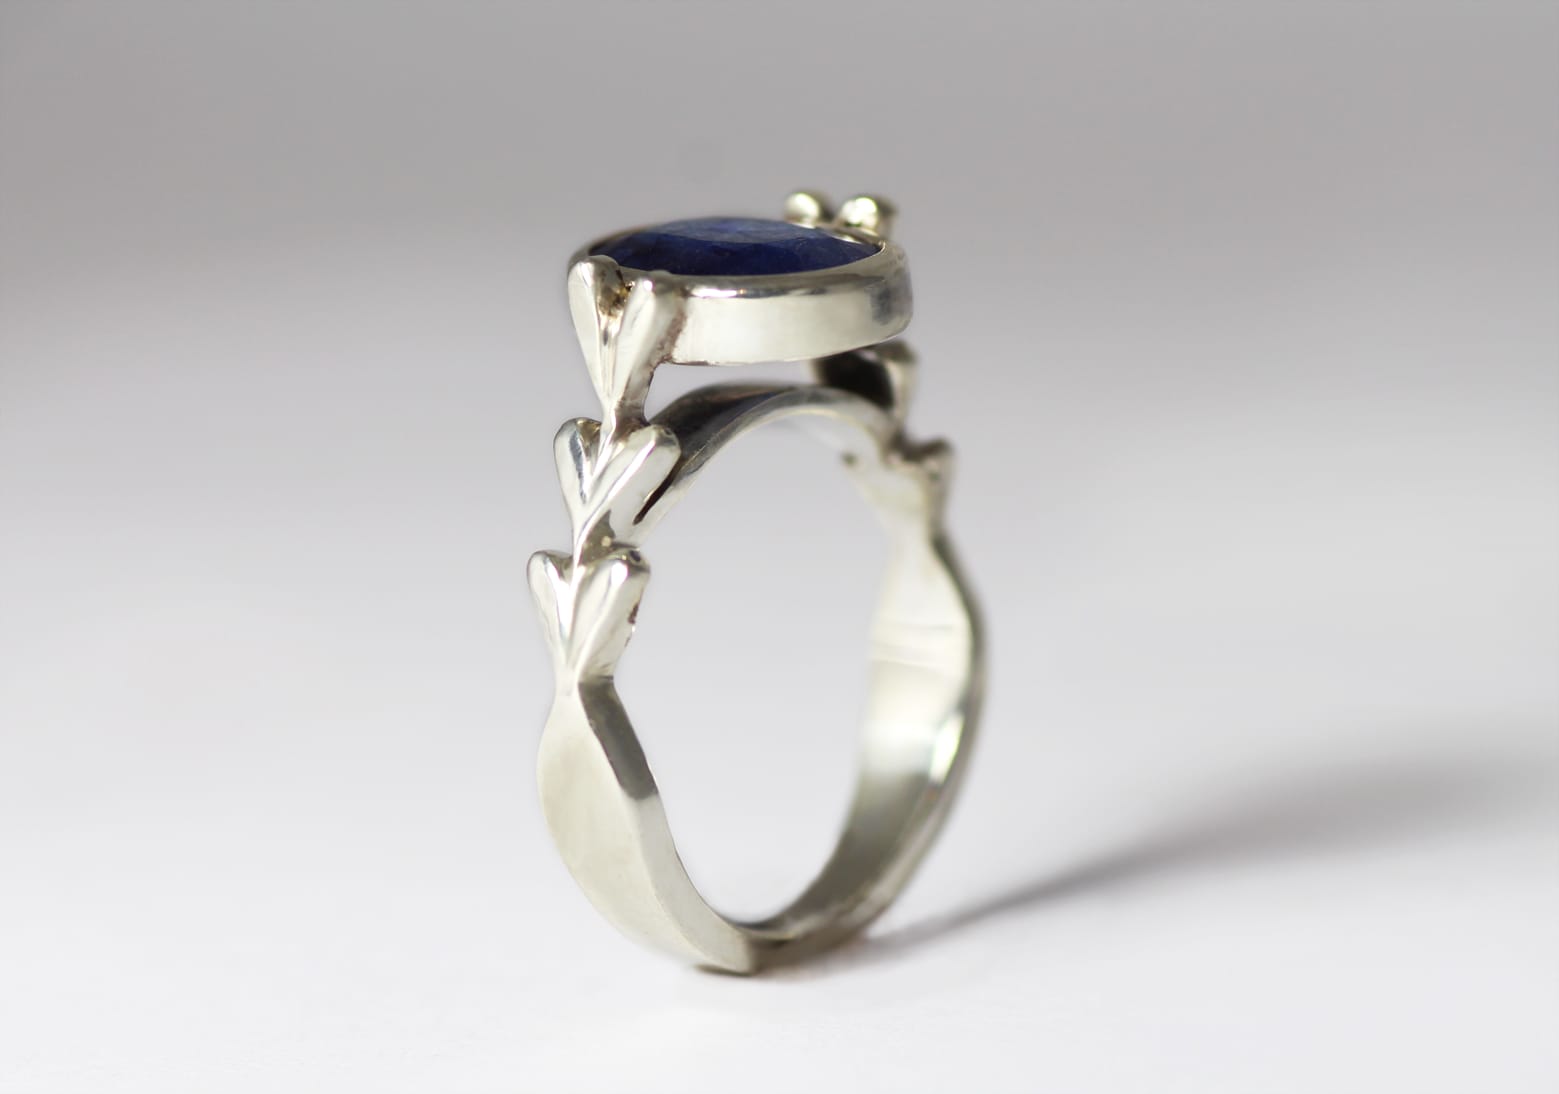 Recycled silver and sapphire ring by Zoe Pook Jewellery